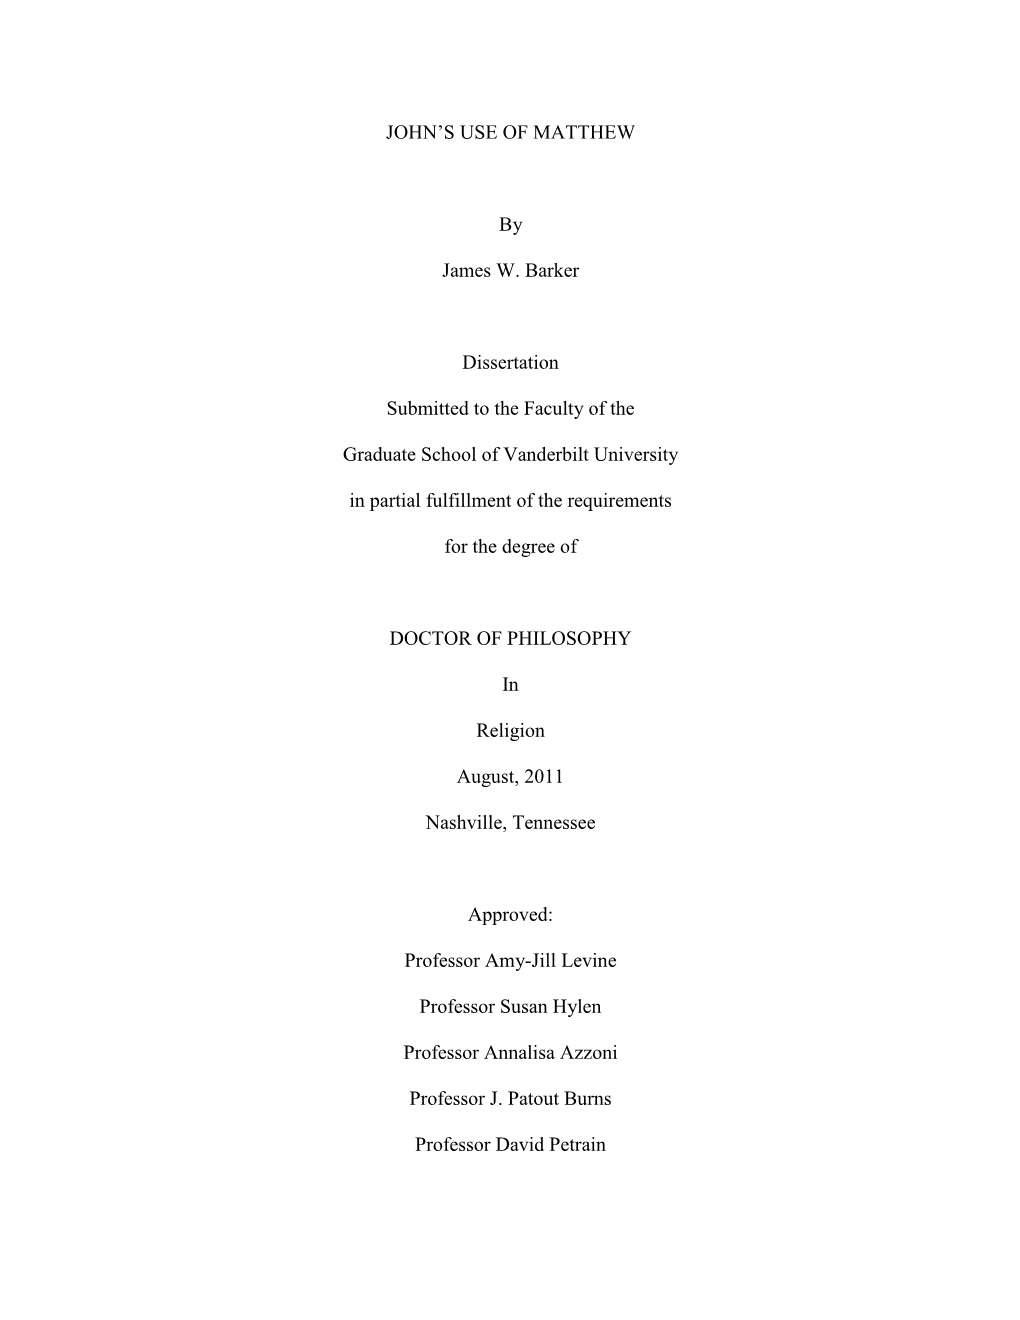 JOHN's USE of MATTHEW by James W. Barker Dissertation Submitted